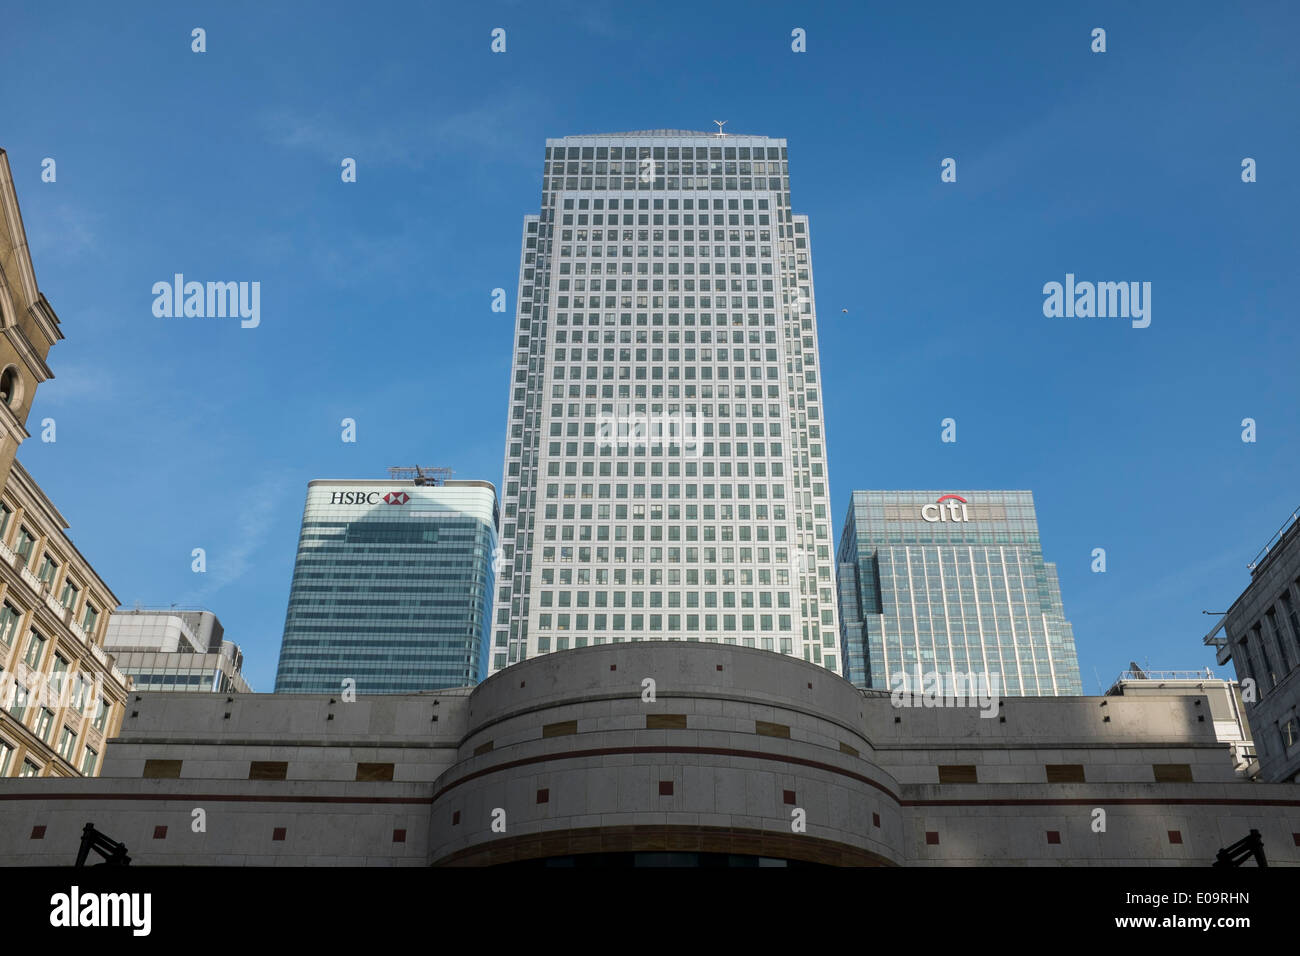 Canary Wharf. The financial district. London. HSBC and Citi Bank Head Quarters. Stock Photo